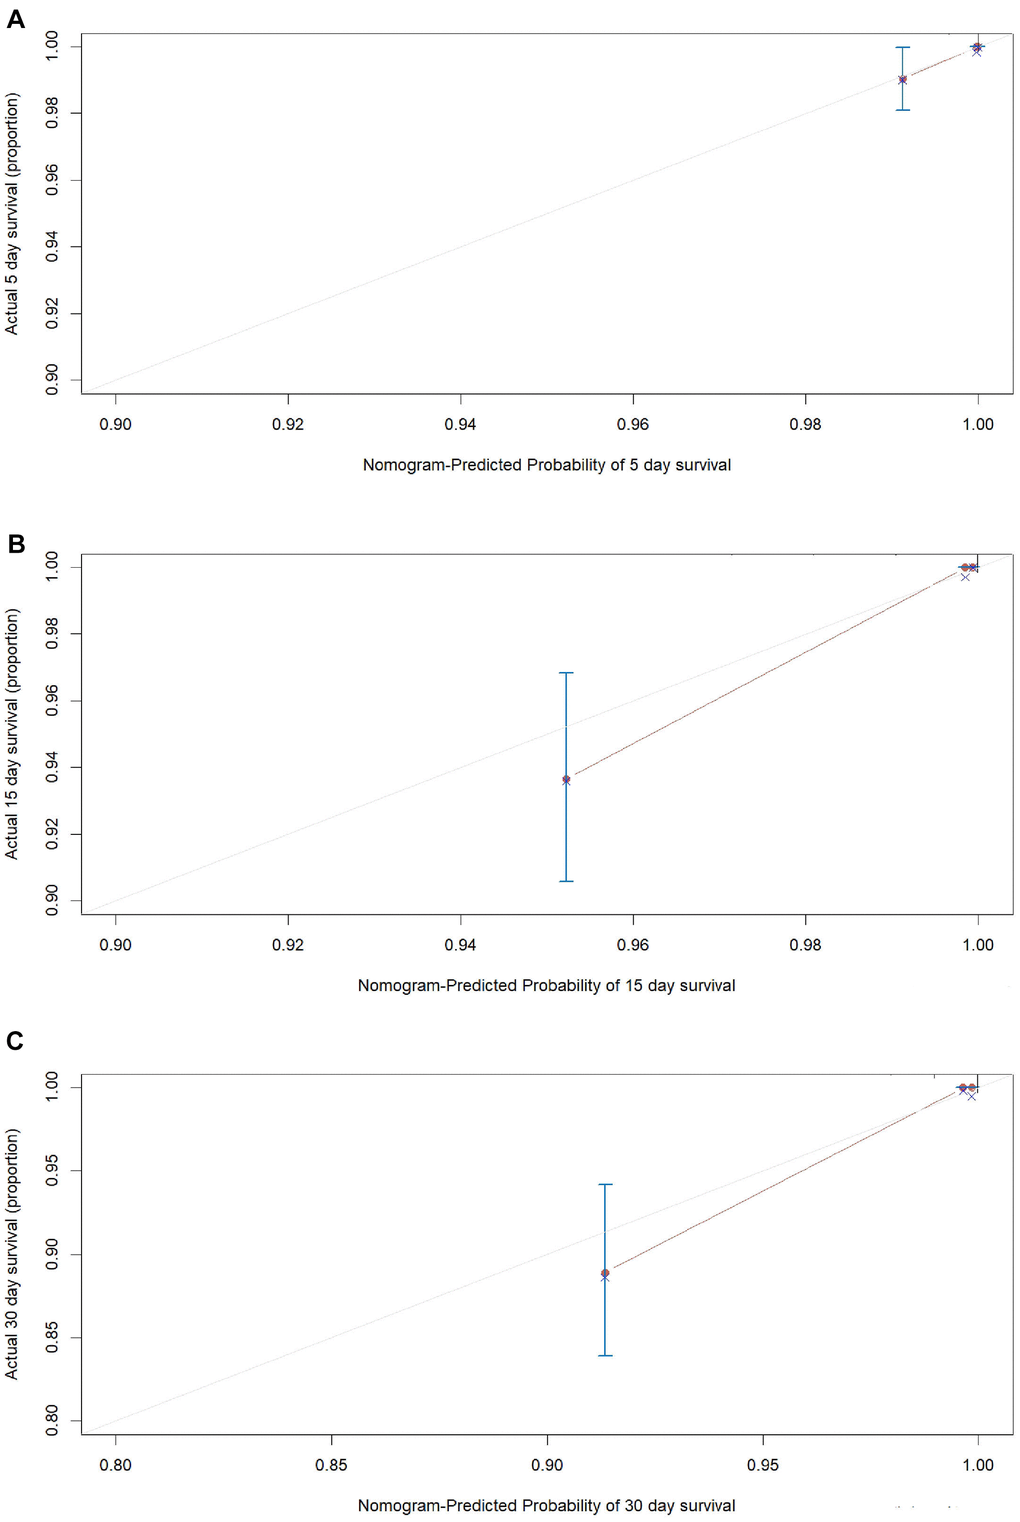 The calibration plots for the probability of in-hospital mortality of COVID-19 in internal validation cohort. Calibration plots of the nomogram predict (A) 5-day, (B) 15-day and (C) 30-day in-hospital mortality in COVID-19 patients in the validation cohort. Nomogram-predicted probability of in-hospital mortality is plotted on the x-axis; actual in-hospital mortality is plotted on the y-axis.